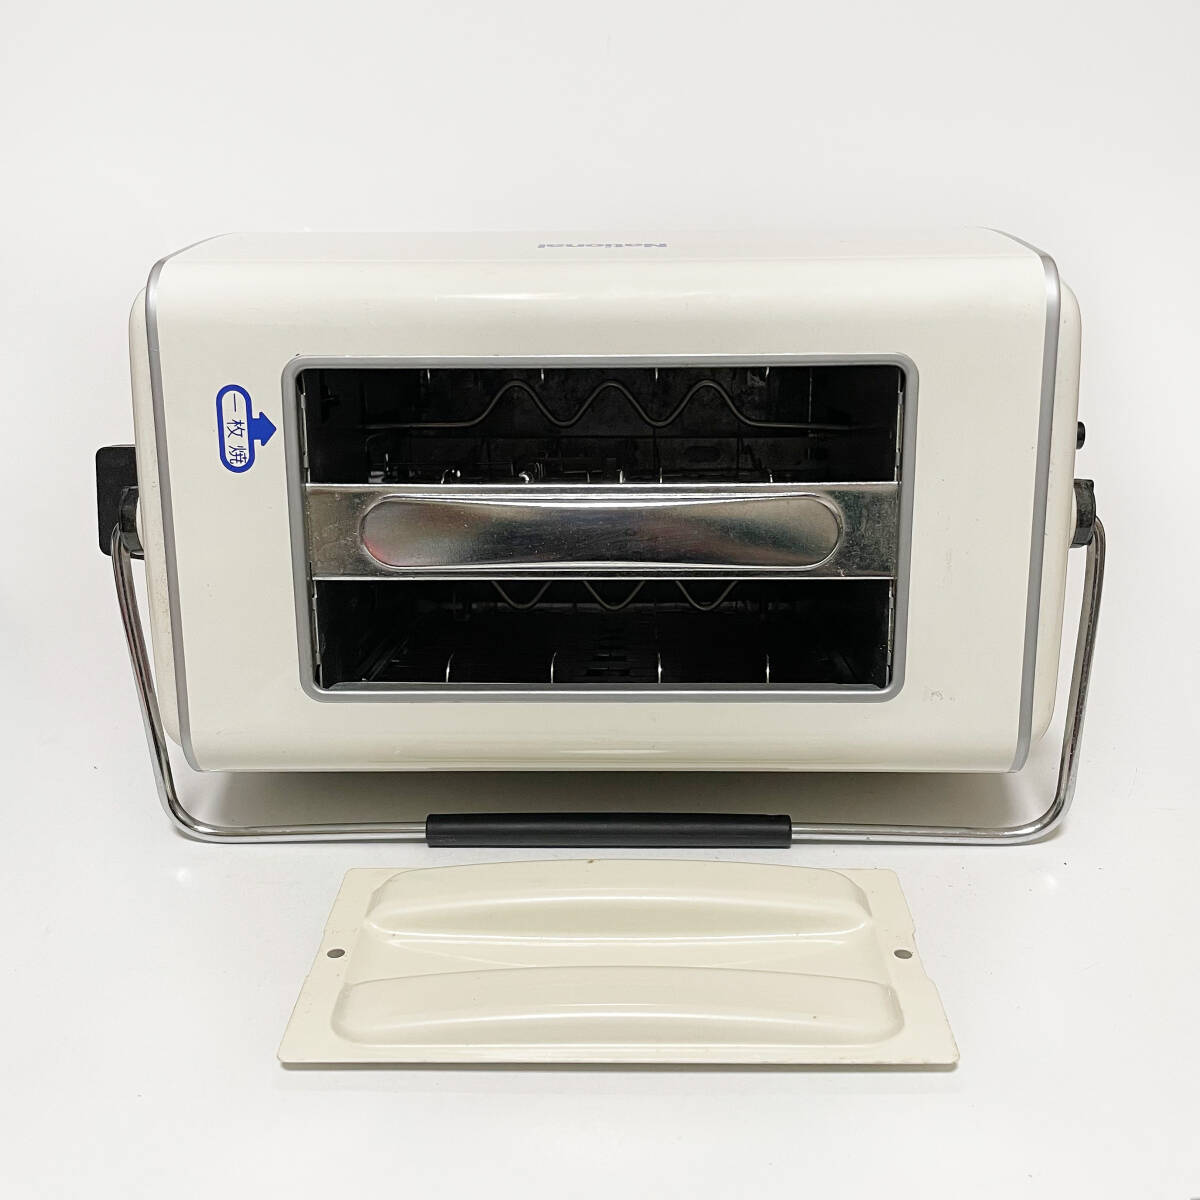  that time thing!National( National ) electric toaster NT-672R / Showa Retro / consumer electronics / antique / pop 